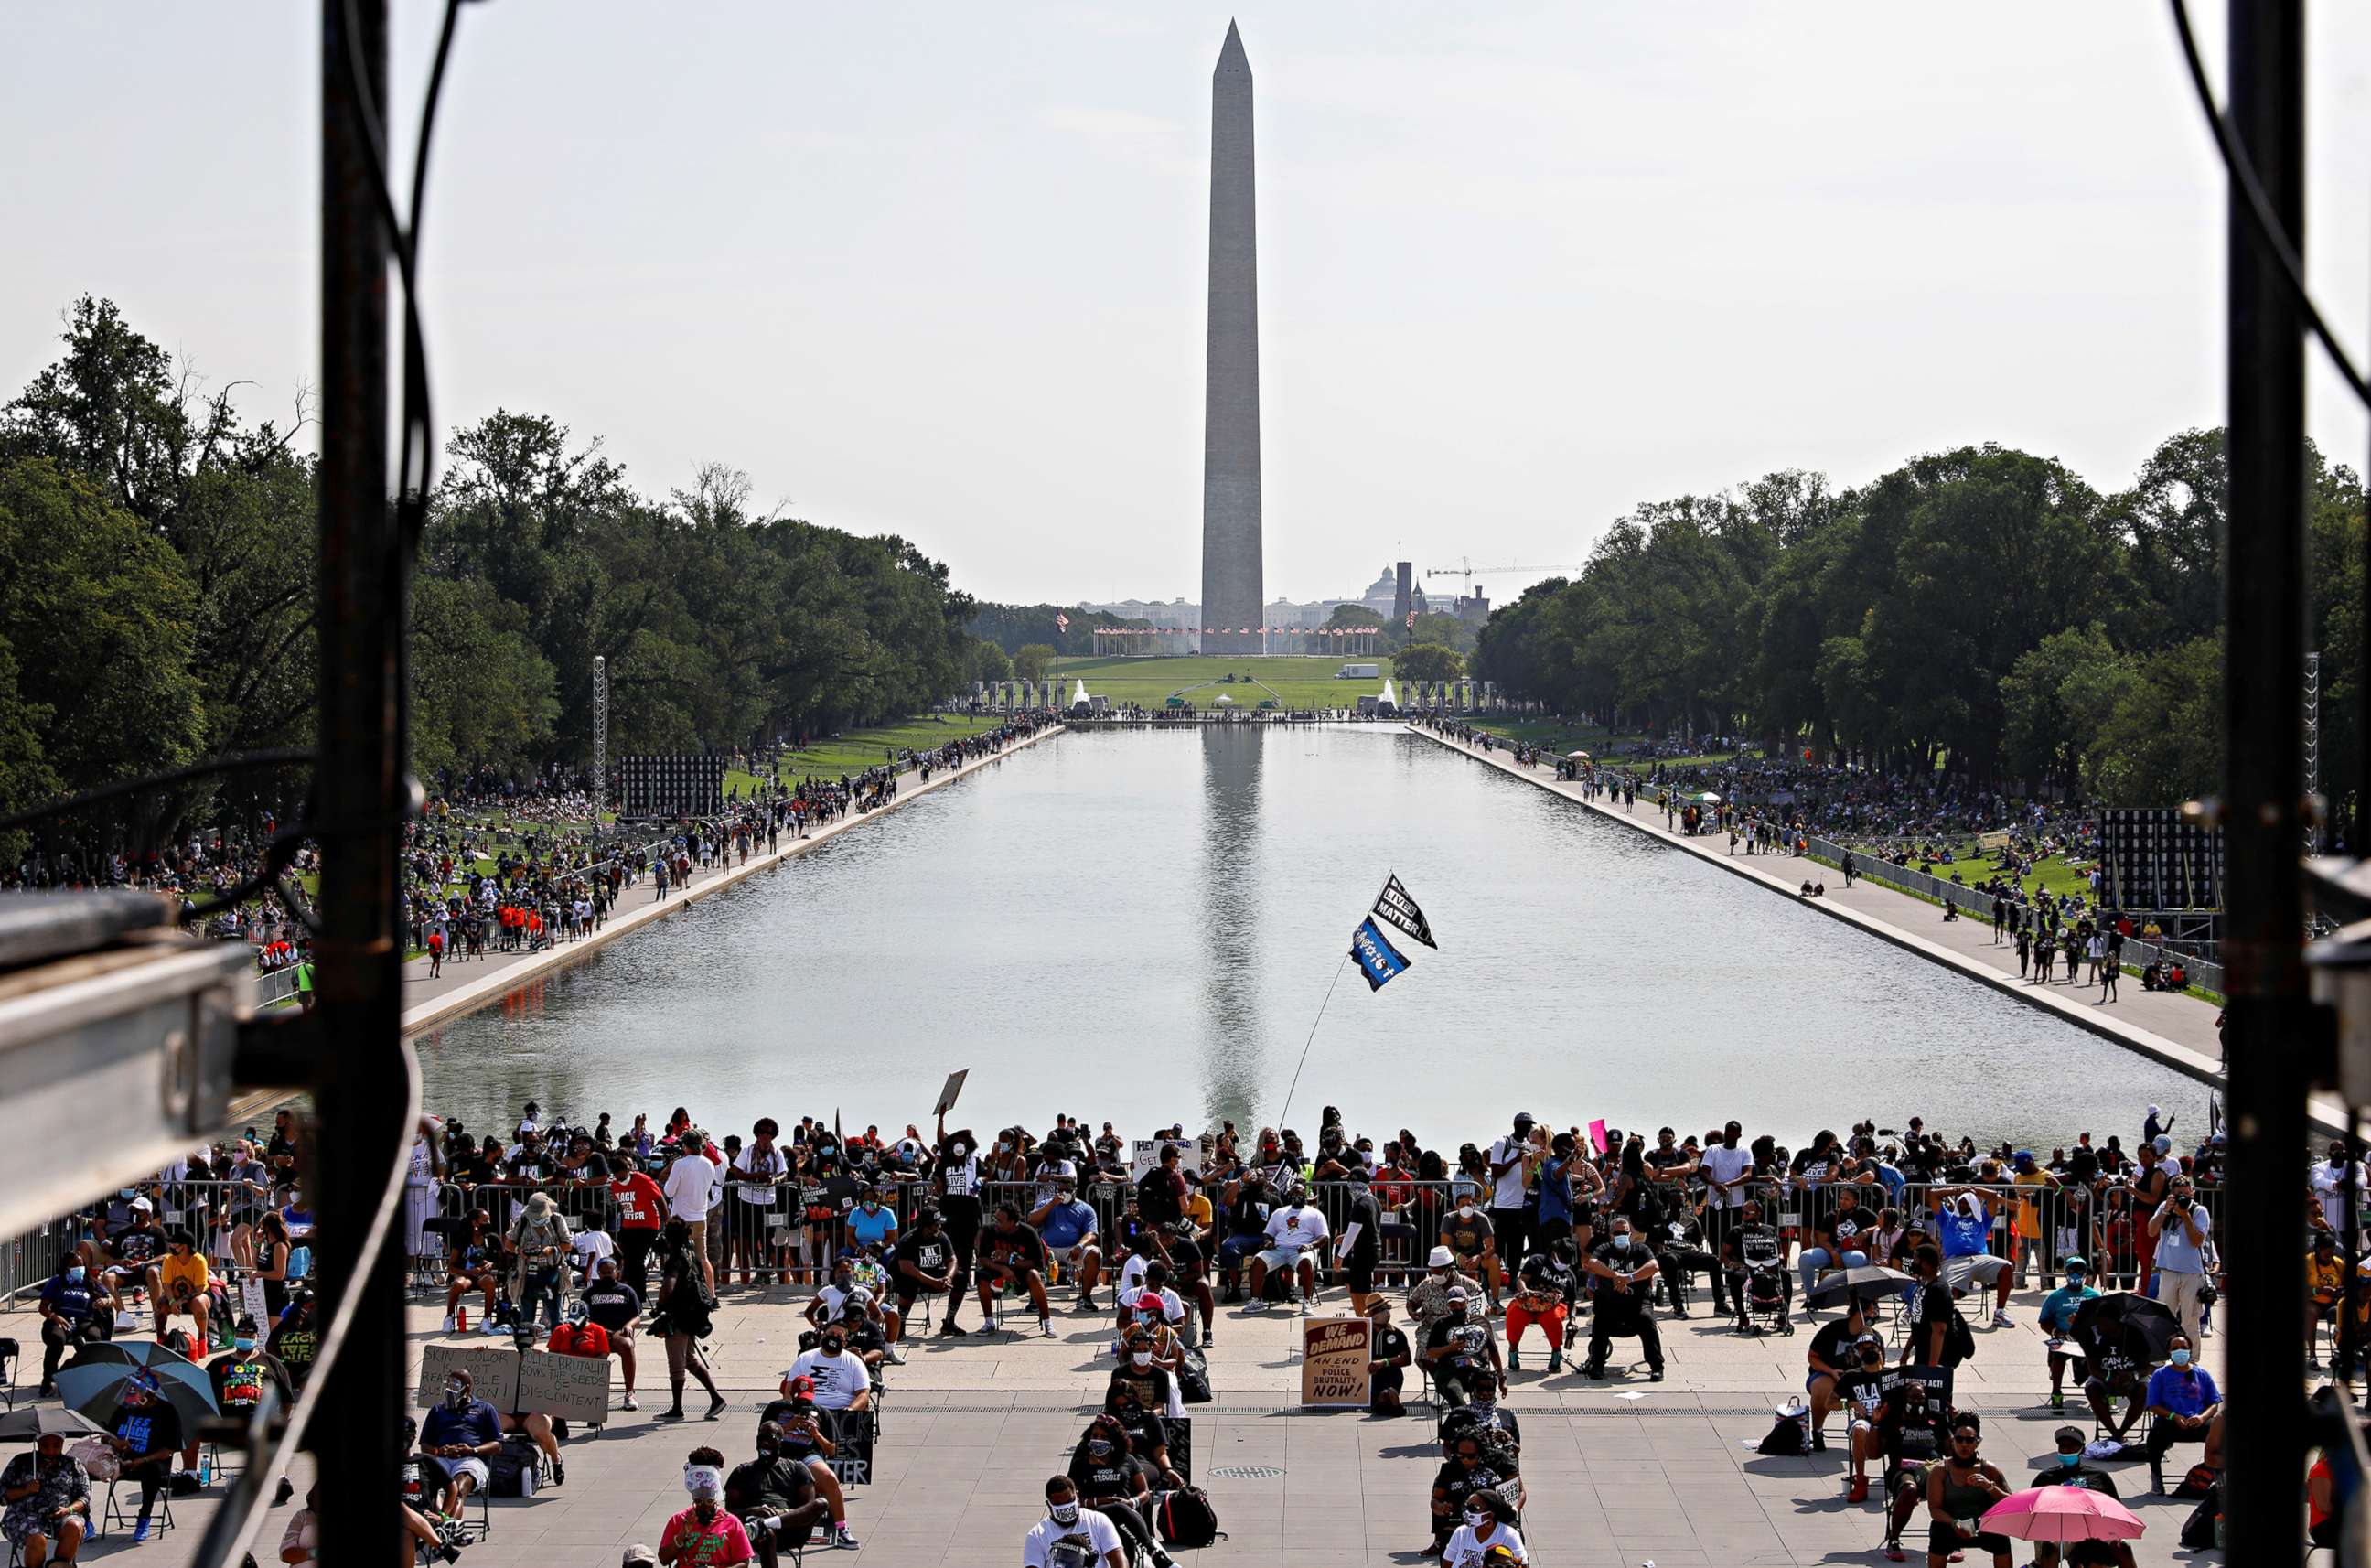 PHOTO: Demonstrators sit in socially distanced chairs at the Lincoln Memorial as thousands more begin to gather along the sides of the Lincoln Memorial reflecting pool for the March on Washington, Aug. 28, 2020.